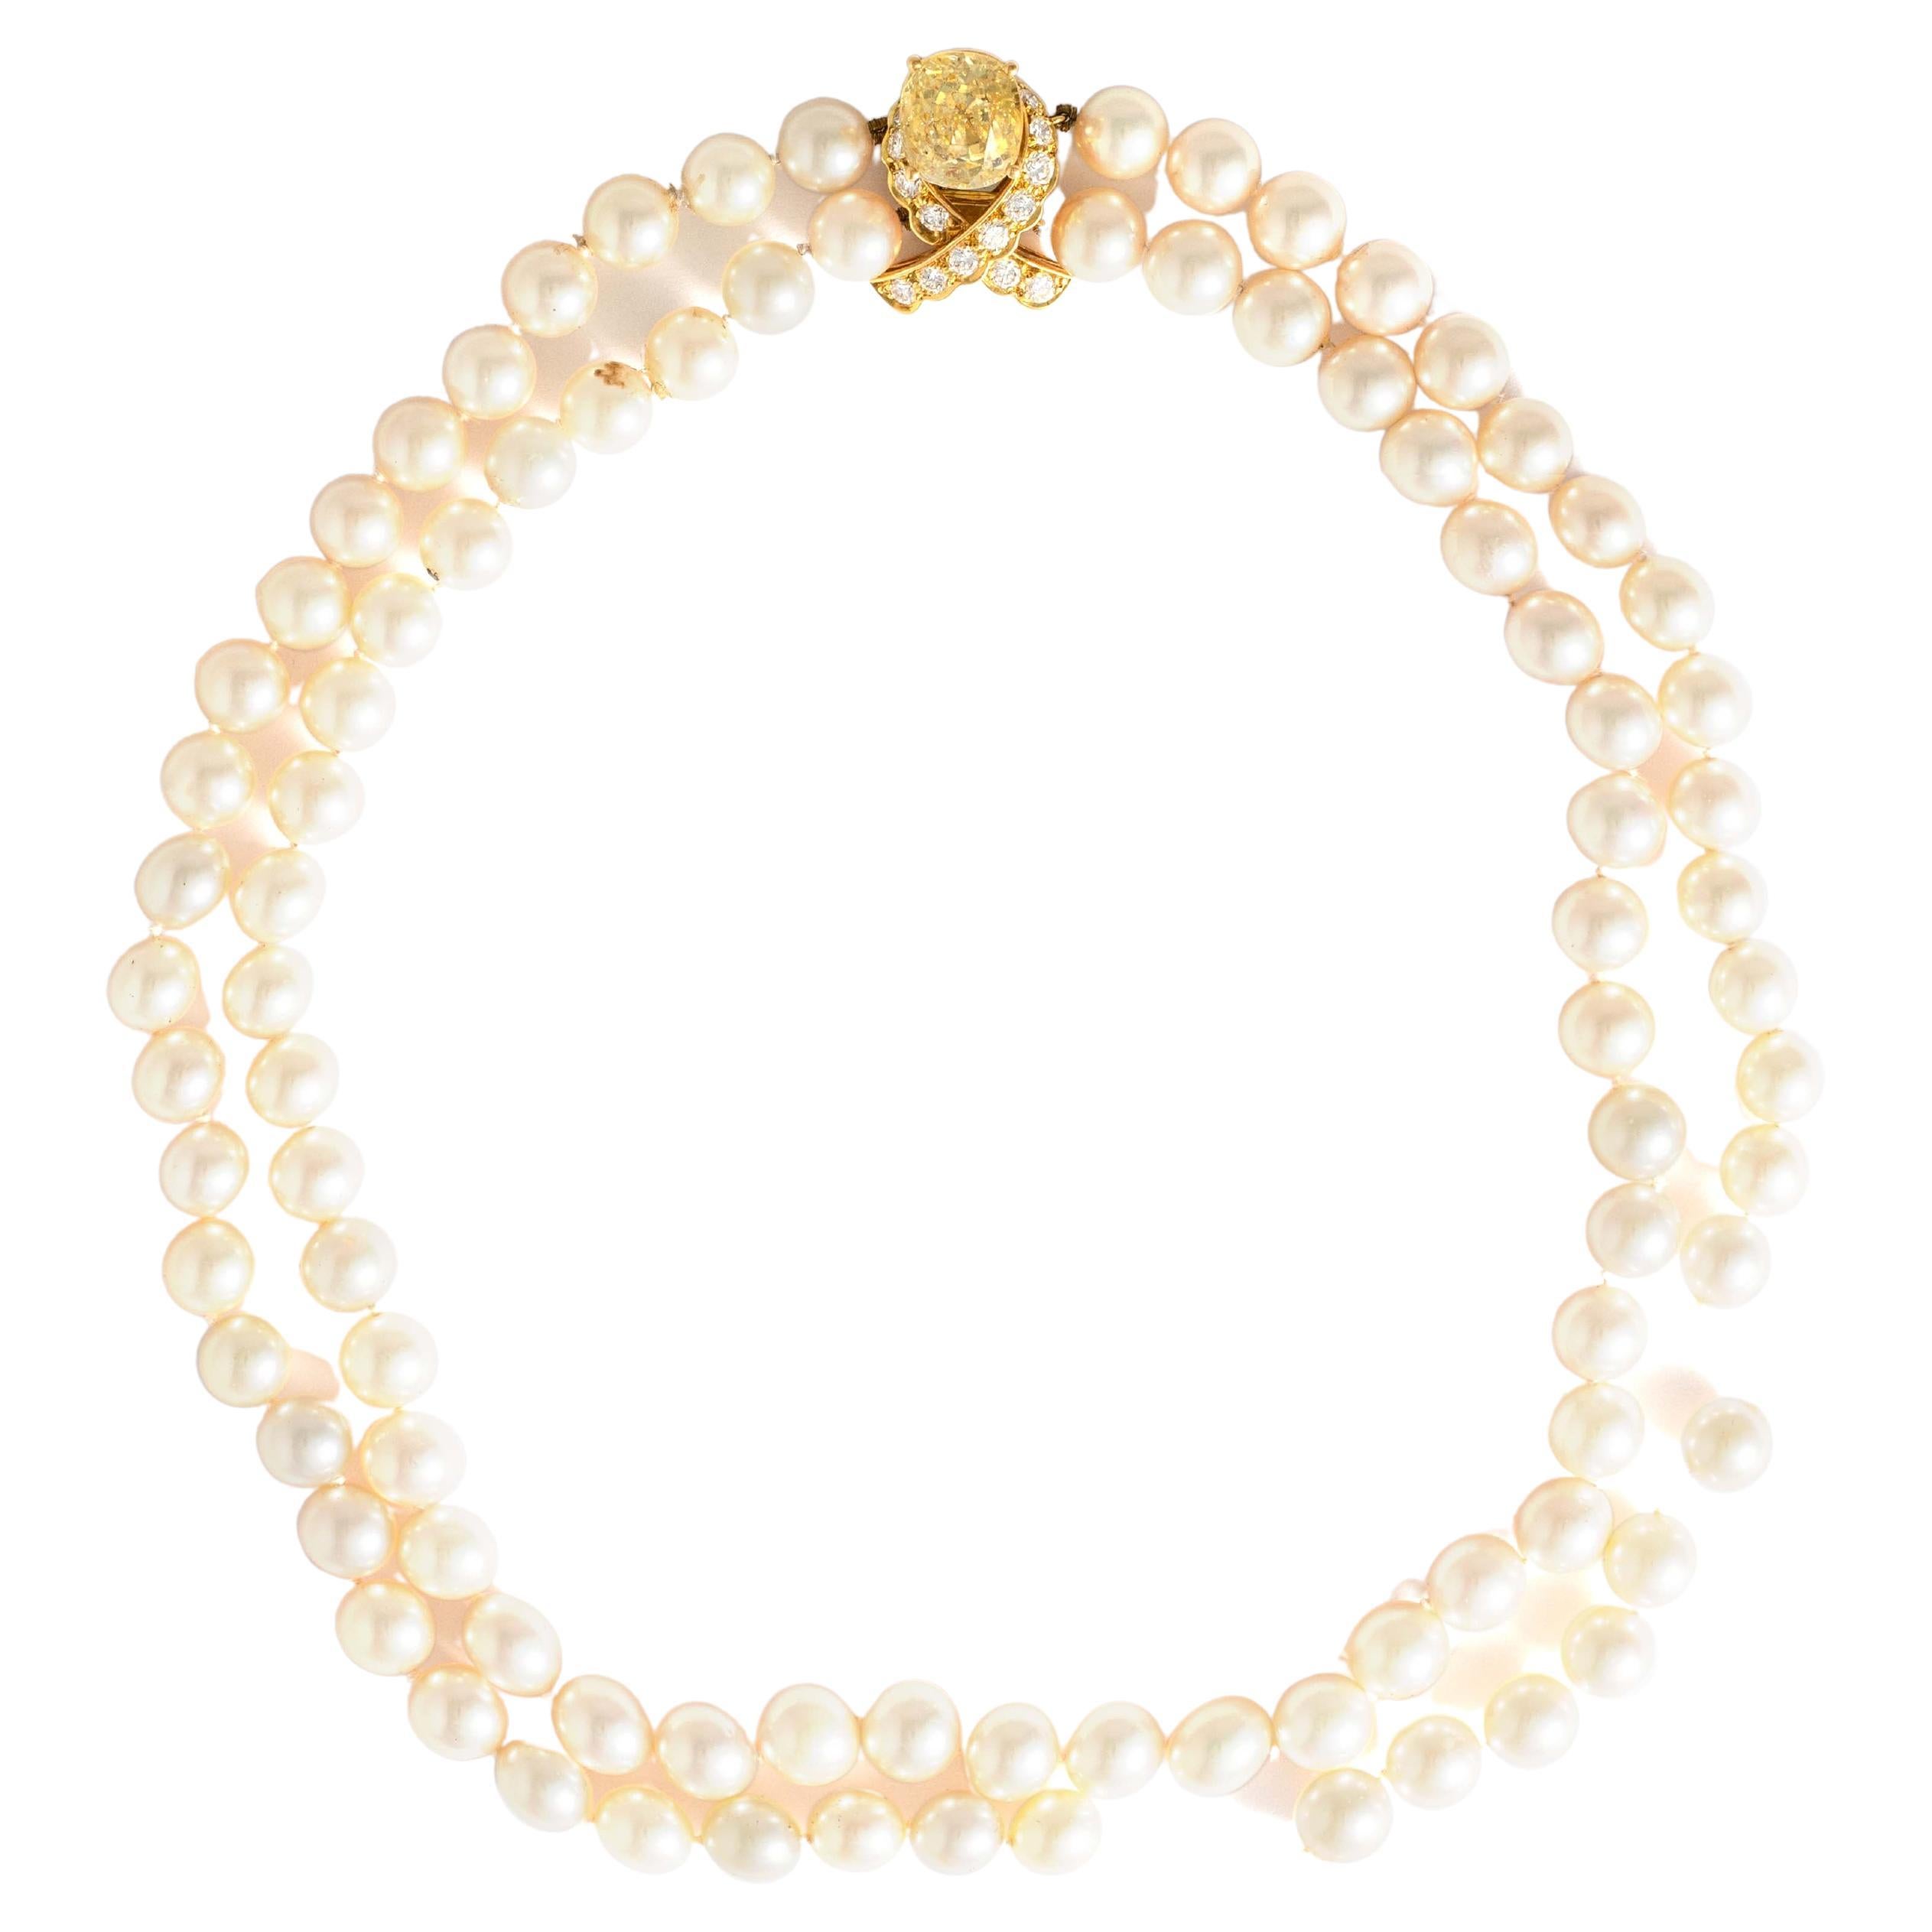 Yellow Sapphire Cushion shape estimated approximately 5.50 / 6.50 carats (treated) surrounded by round-cut Diamond on Yellow Gold 18K Clasp Cultured Pearl Necklace (pearl necklace is broken).

Gubelin maker's mark.
Dimension of the Sapphire: 10.19